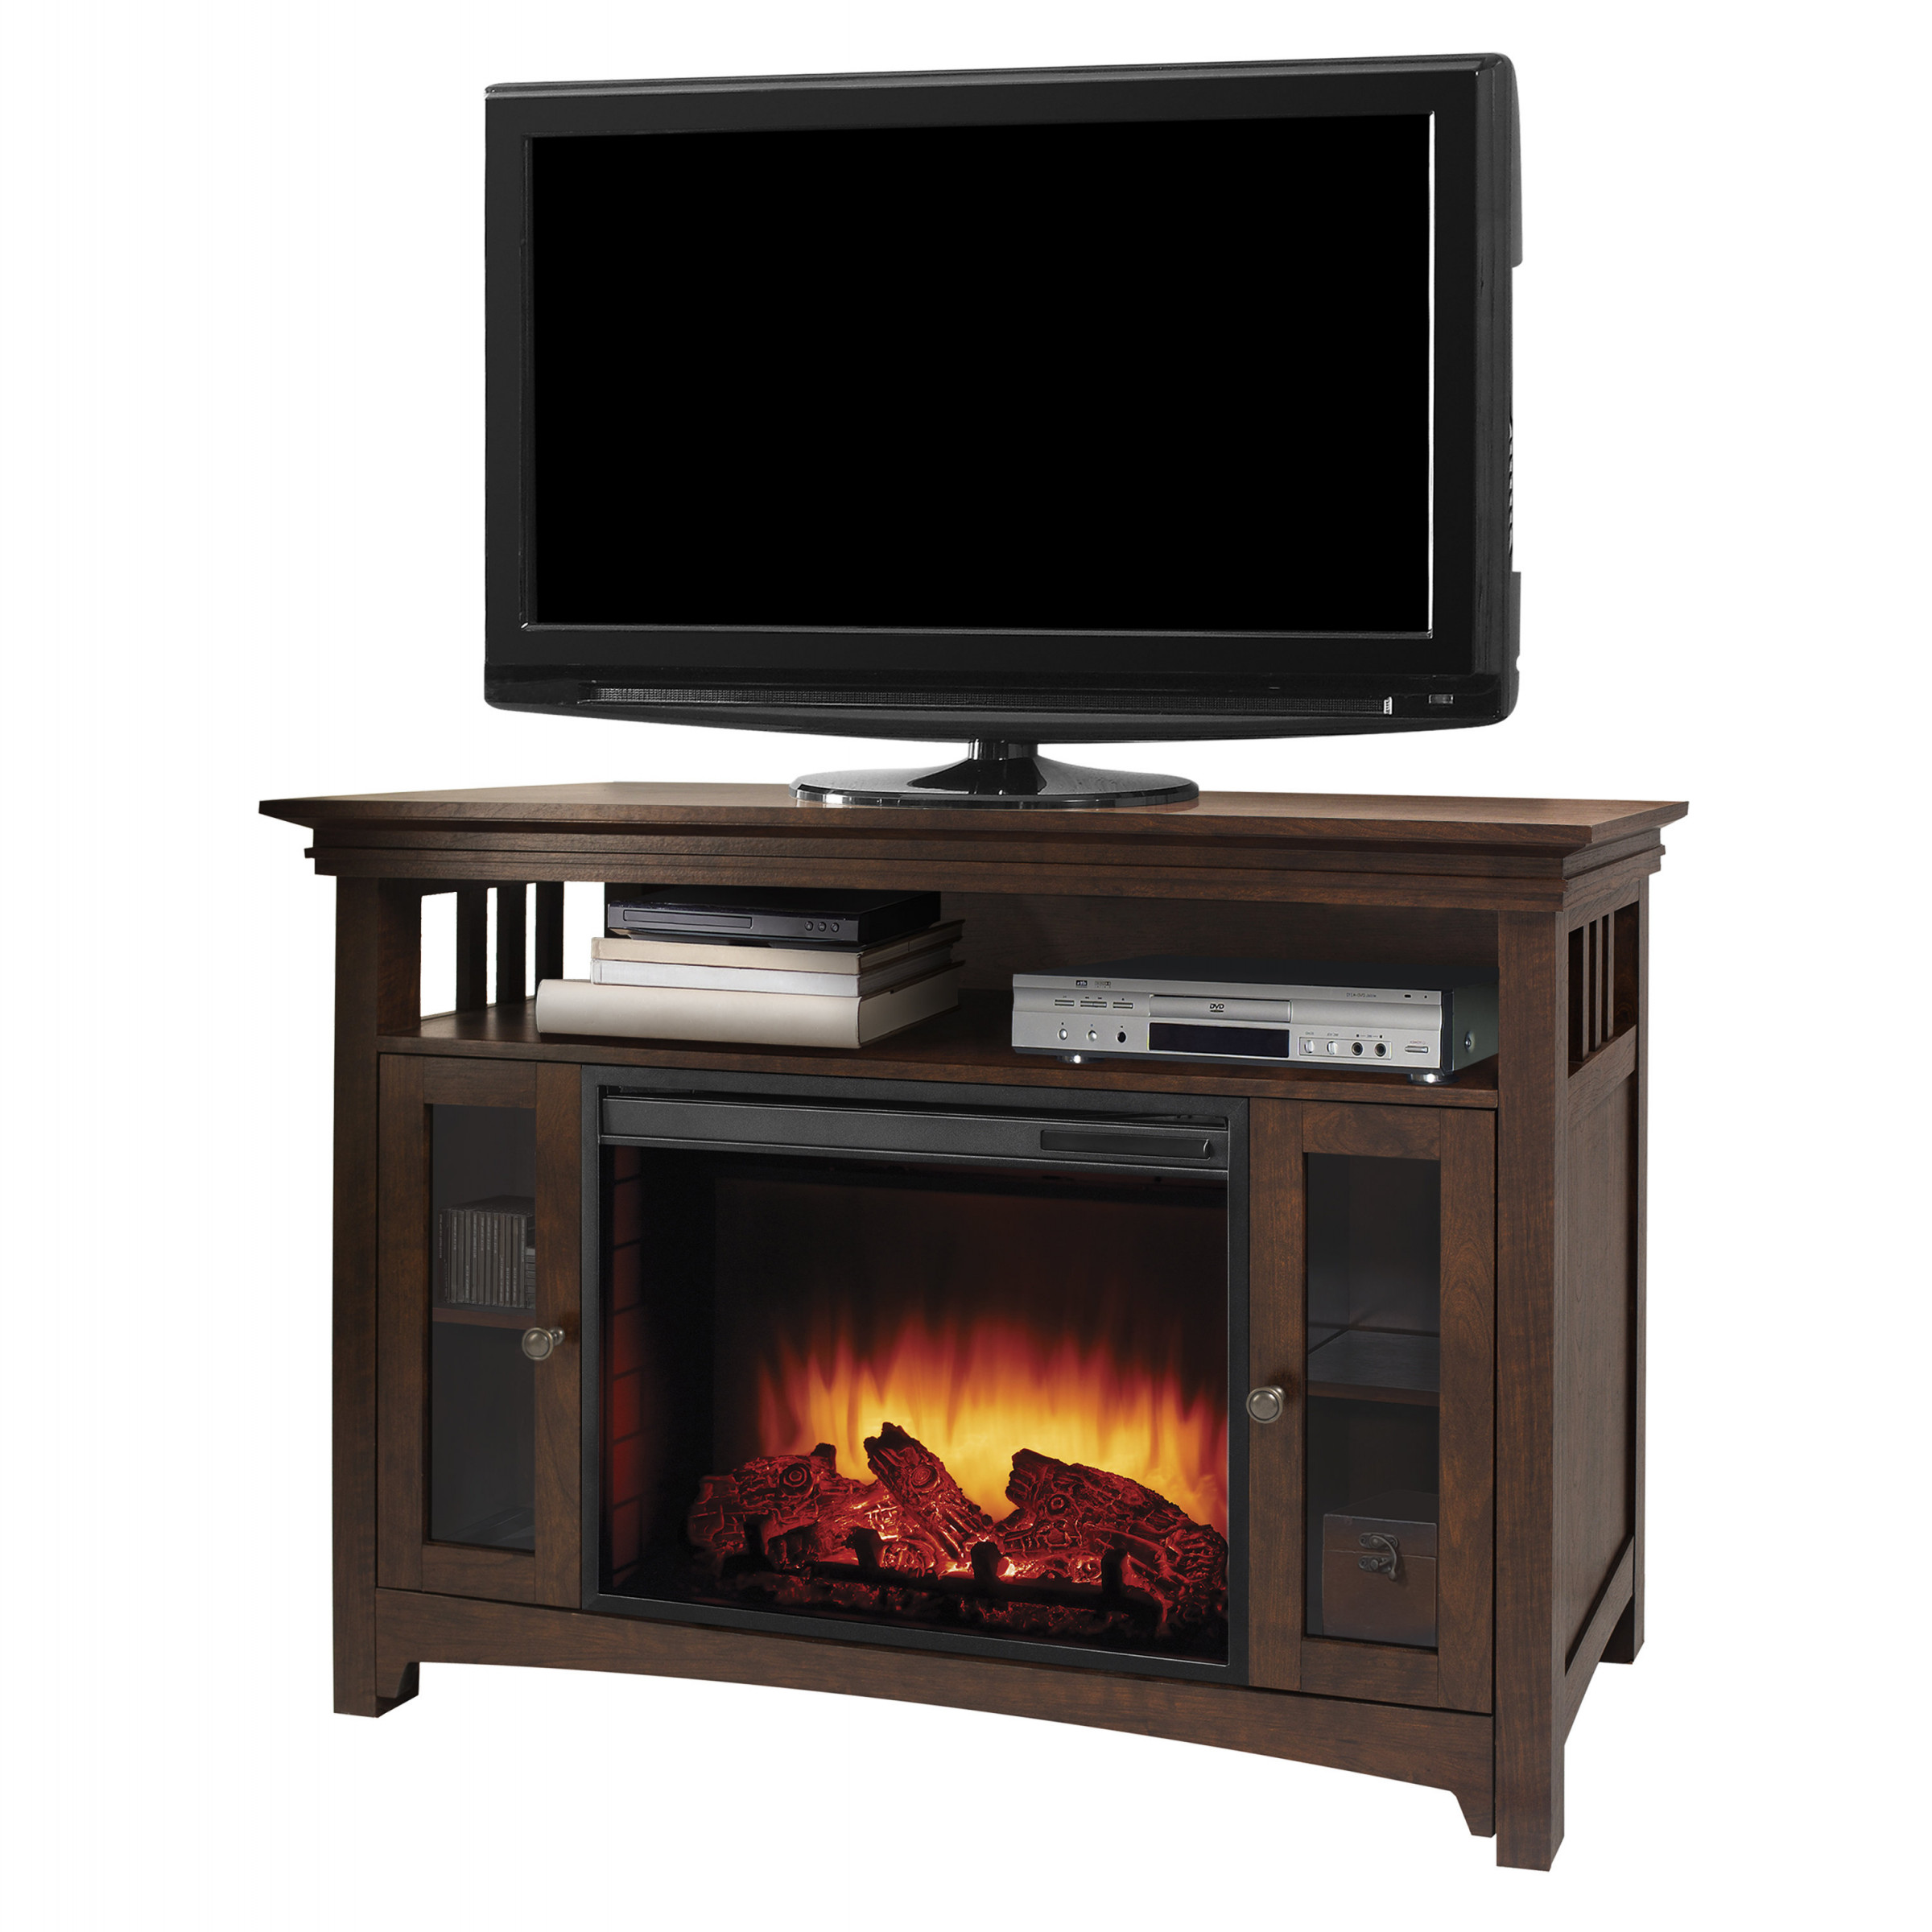 Rustic Electric Fireplace Tv Stand New 35 Minimaliste Electric Fireplace Tv Stand